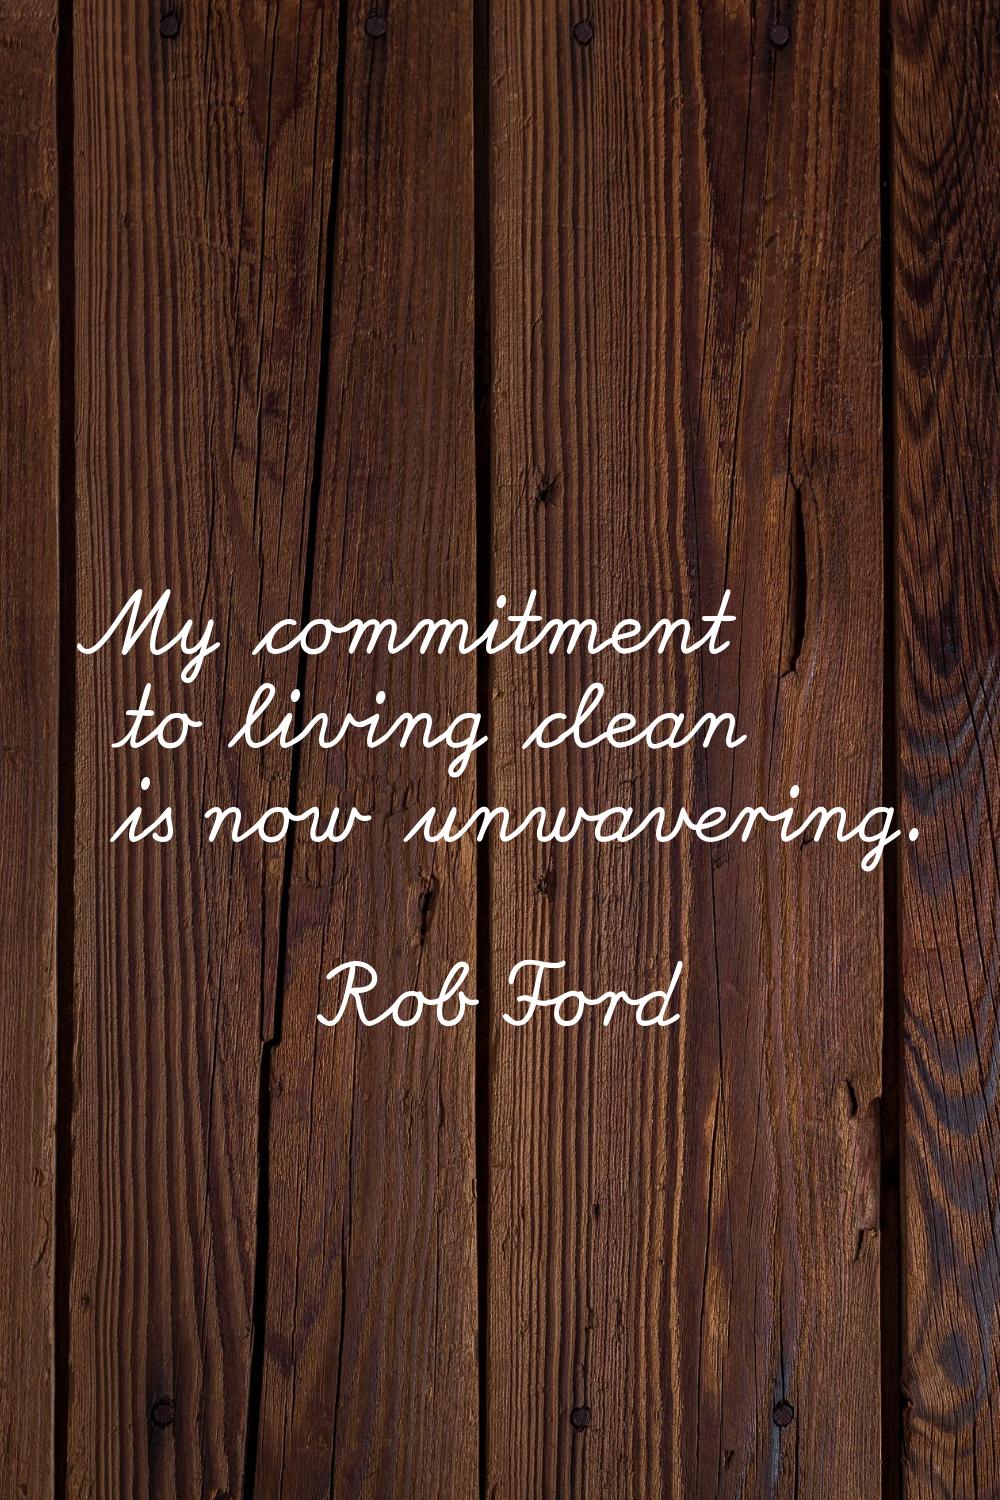 My commitment to living clean is now unwavering.